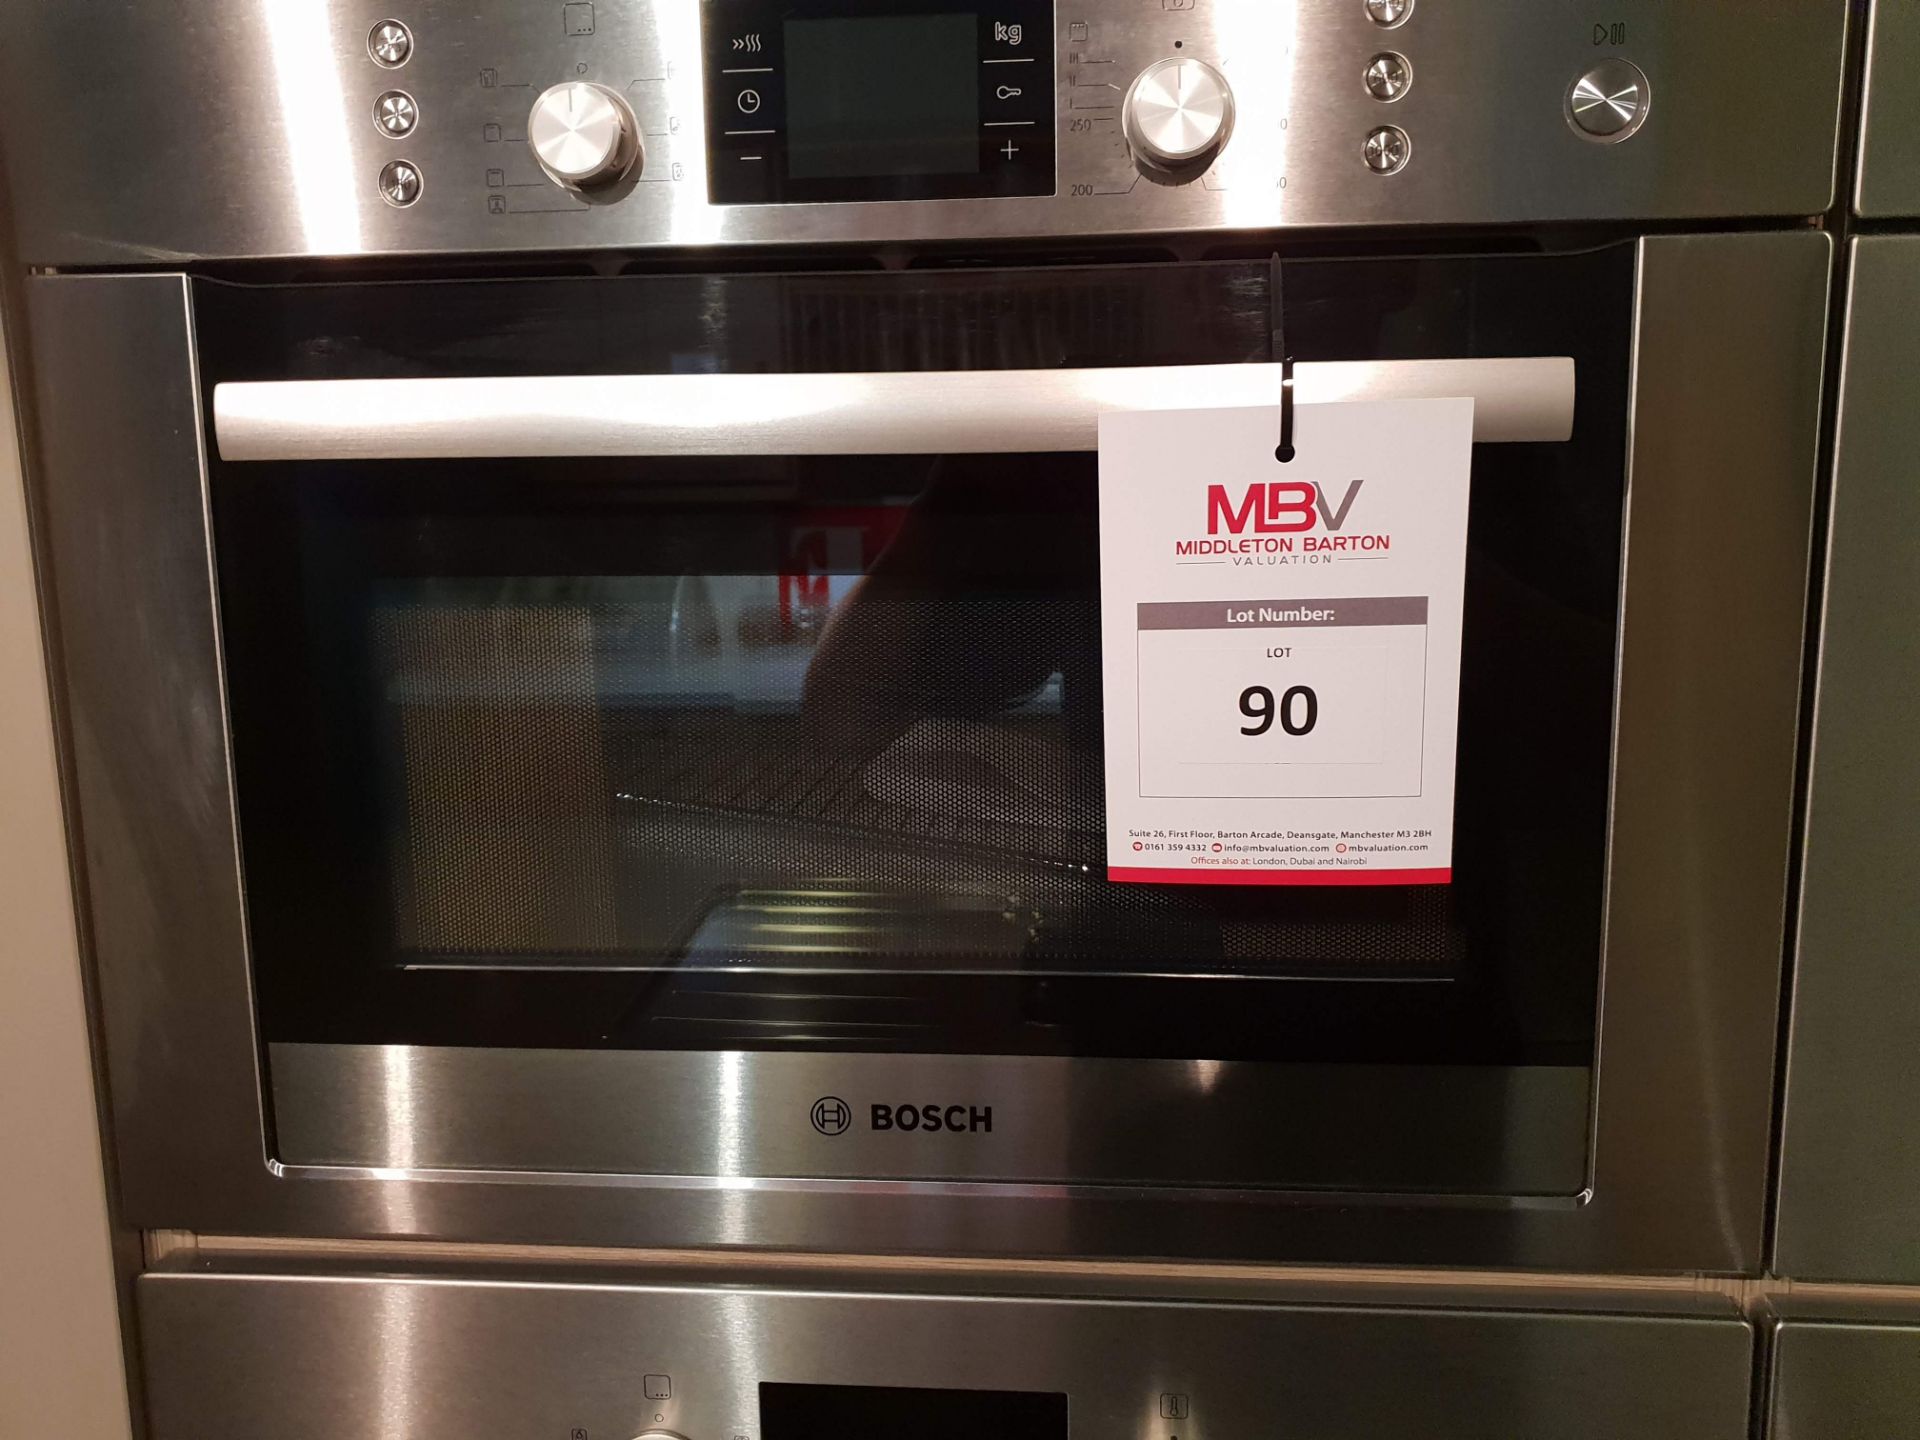 4 x Bosch Integrated Appliances comprising: 2 x Electric Ovens, Microwave and Coffee Machine - Image 2 of 5